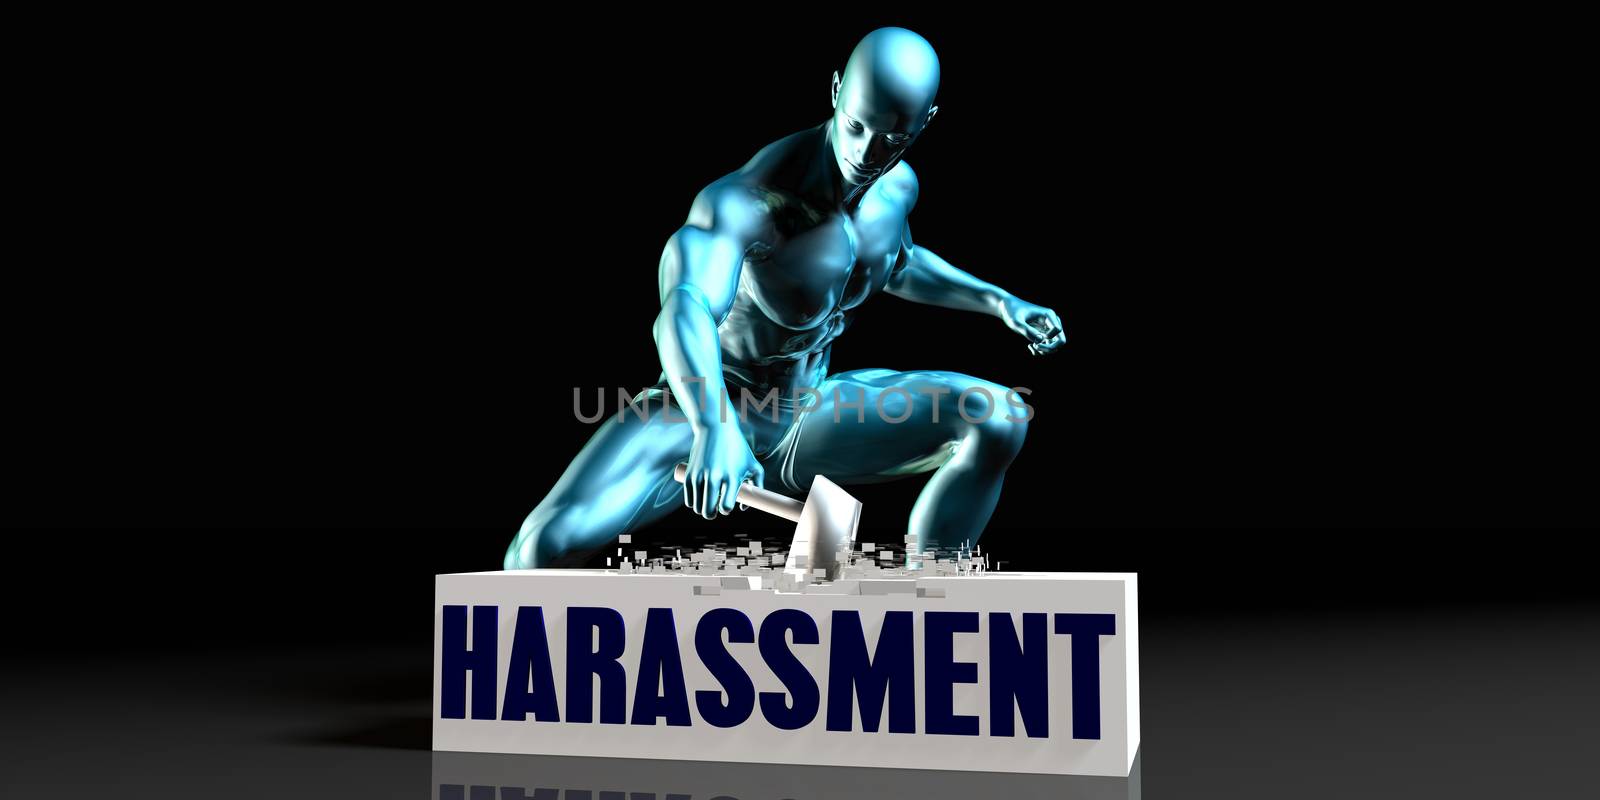 Get Rid of Harassment and Remove the Problem